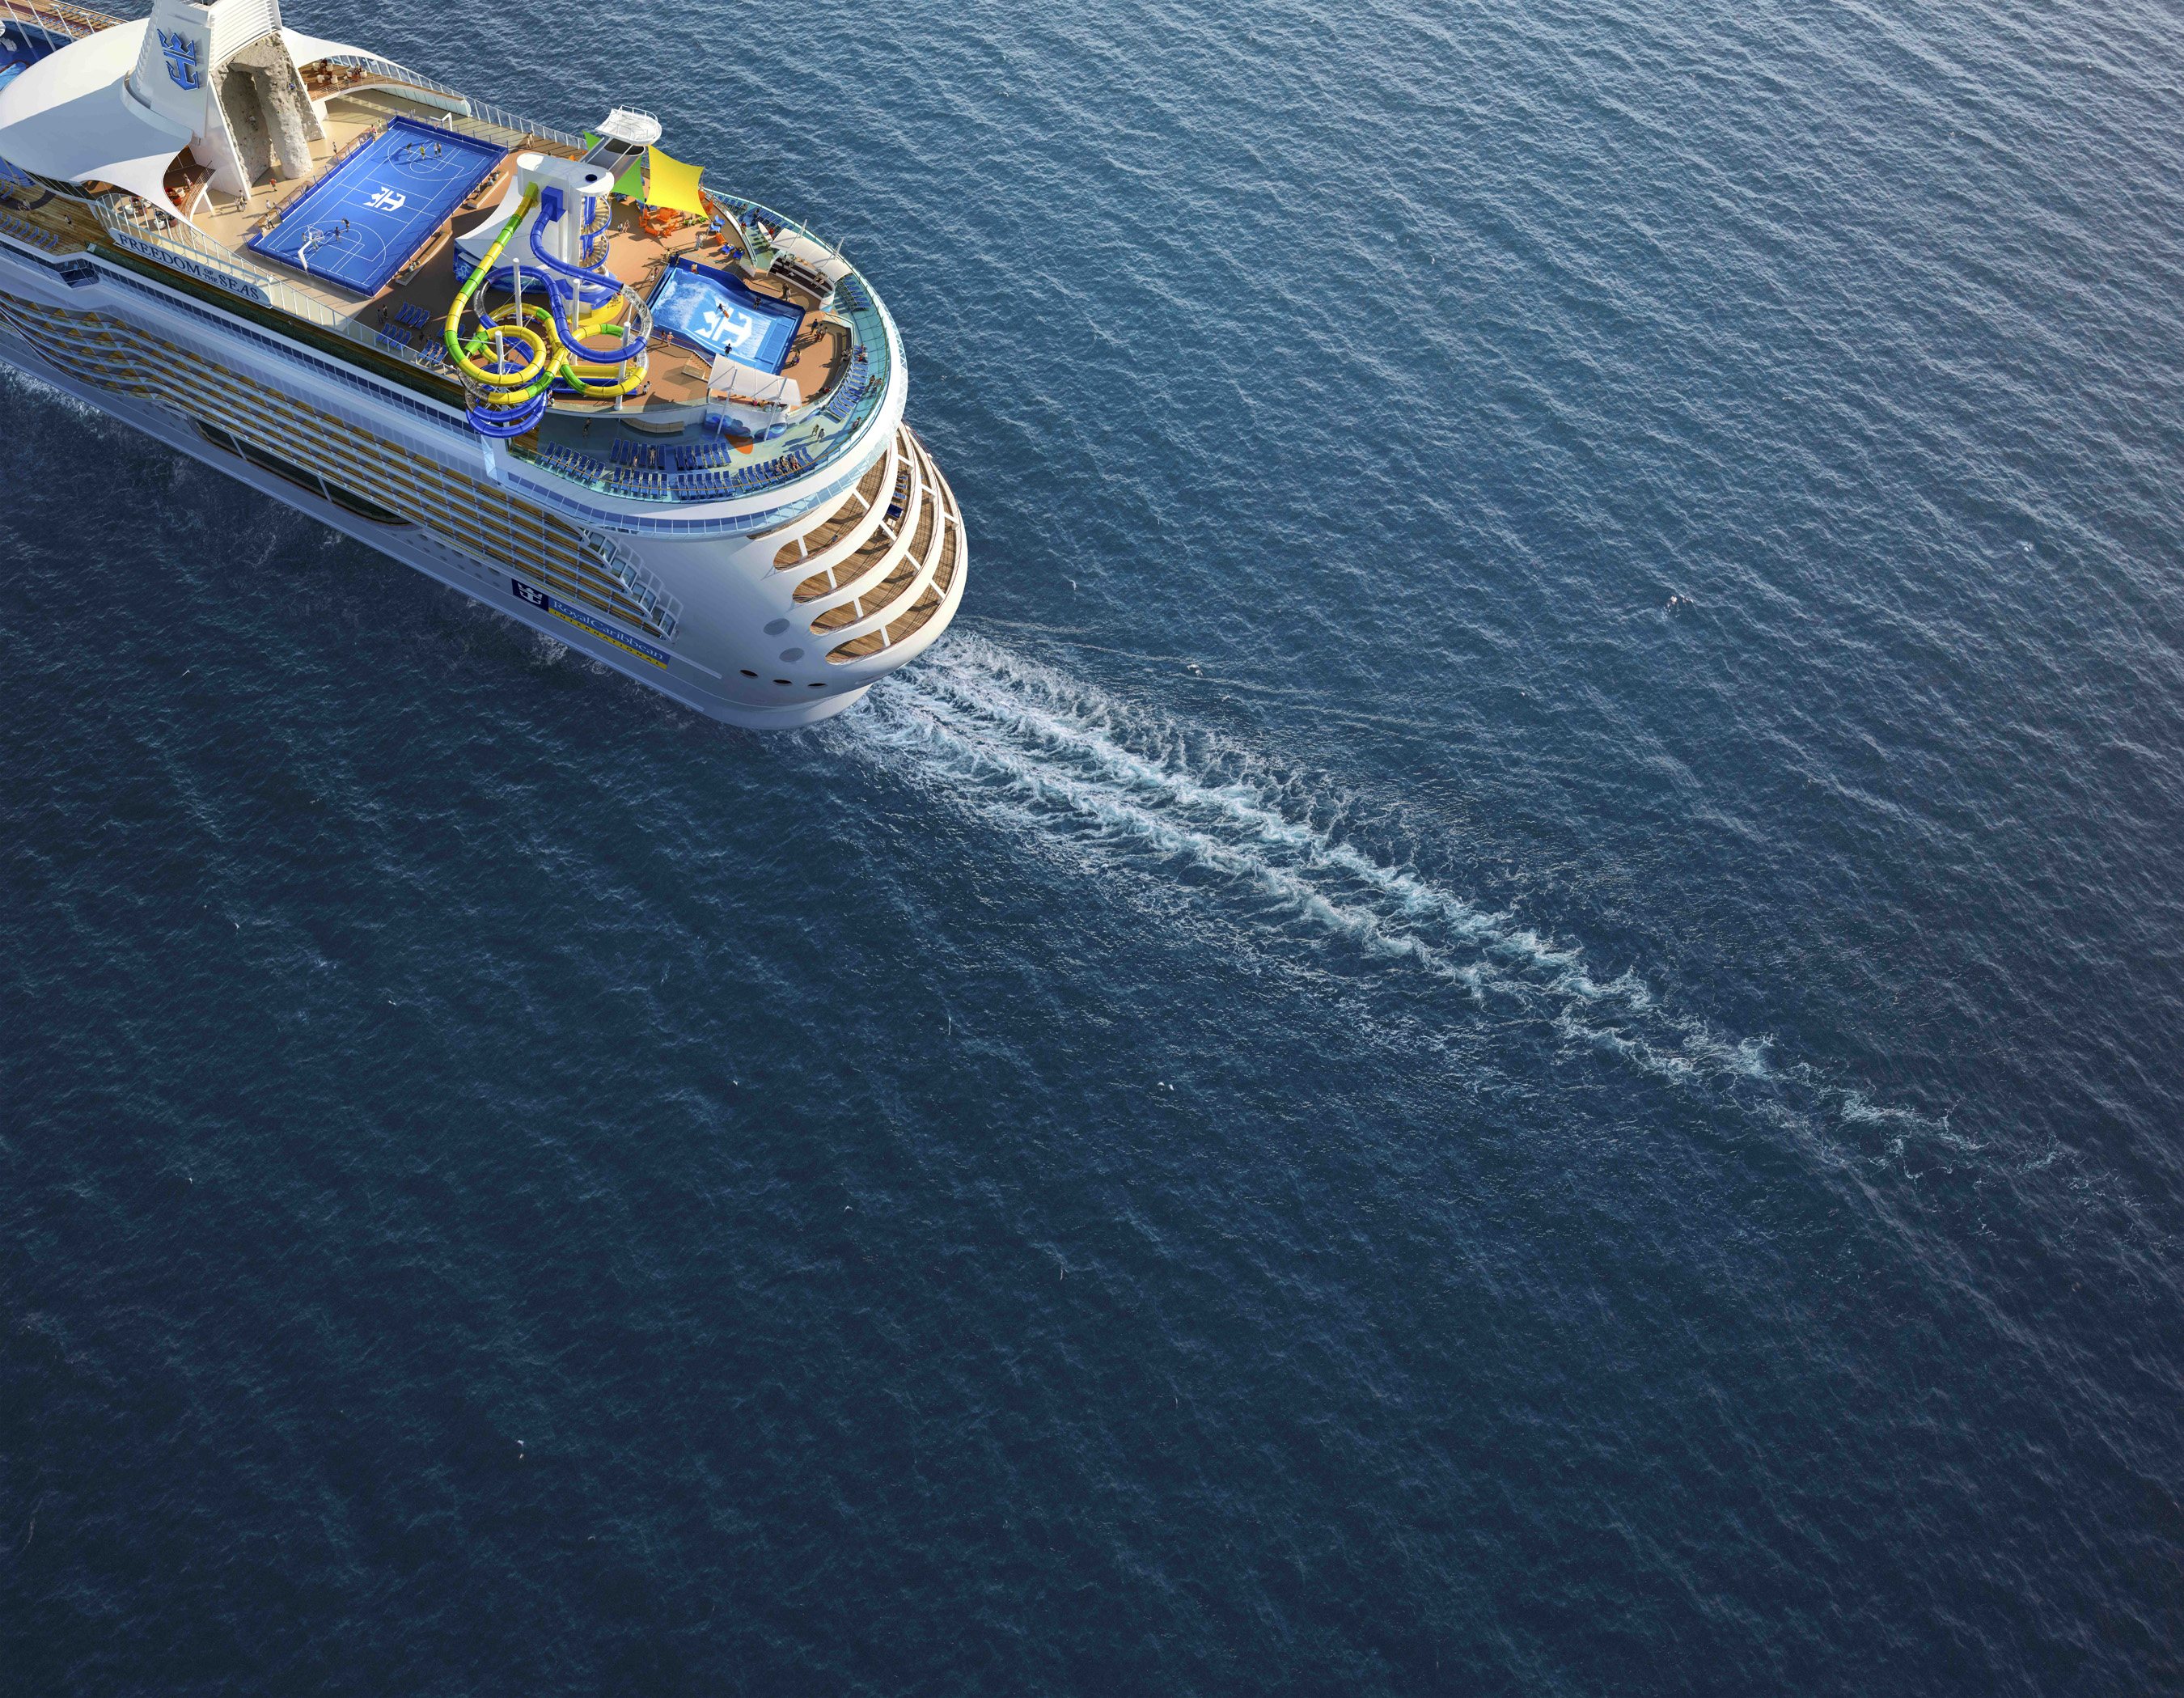 Royal Caribbean’s $116 million amplification of Freedom of the Seas touts high-energy features and guest favorites on board. Highlights include The Perfect Storm duo of waterslides, a reimagined Caribbean poolscape, Giovanni’s Italian Kitchen, a new take on a signature venue; and completely transformed kids and teens spaces.